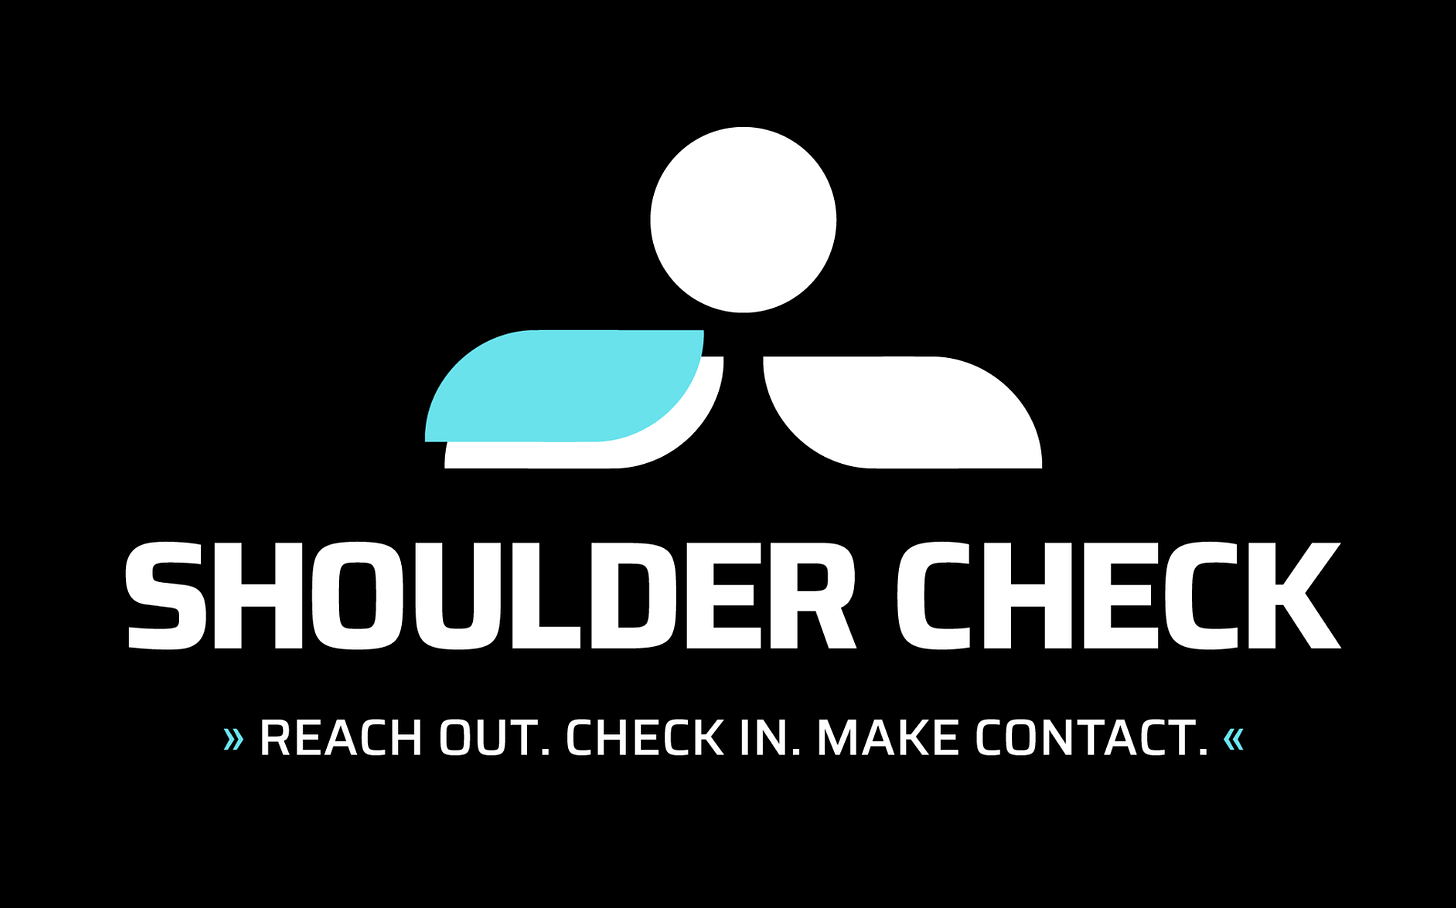 Text and logo of the Shoudler check initiative are in white text set against a black background.. Logo is a circle for a head and drawn shoulders beneath. Motto says "Shoulder Check: Reach out. Check in. Make contact." The logo has a little bit of blue on the white shoulder.